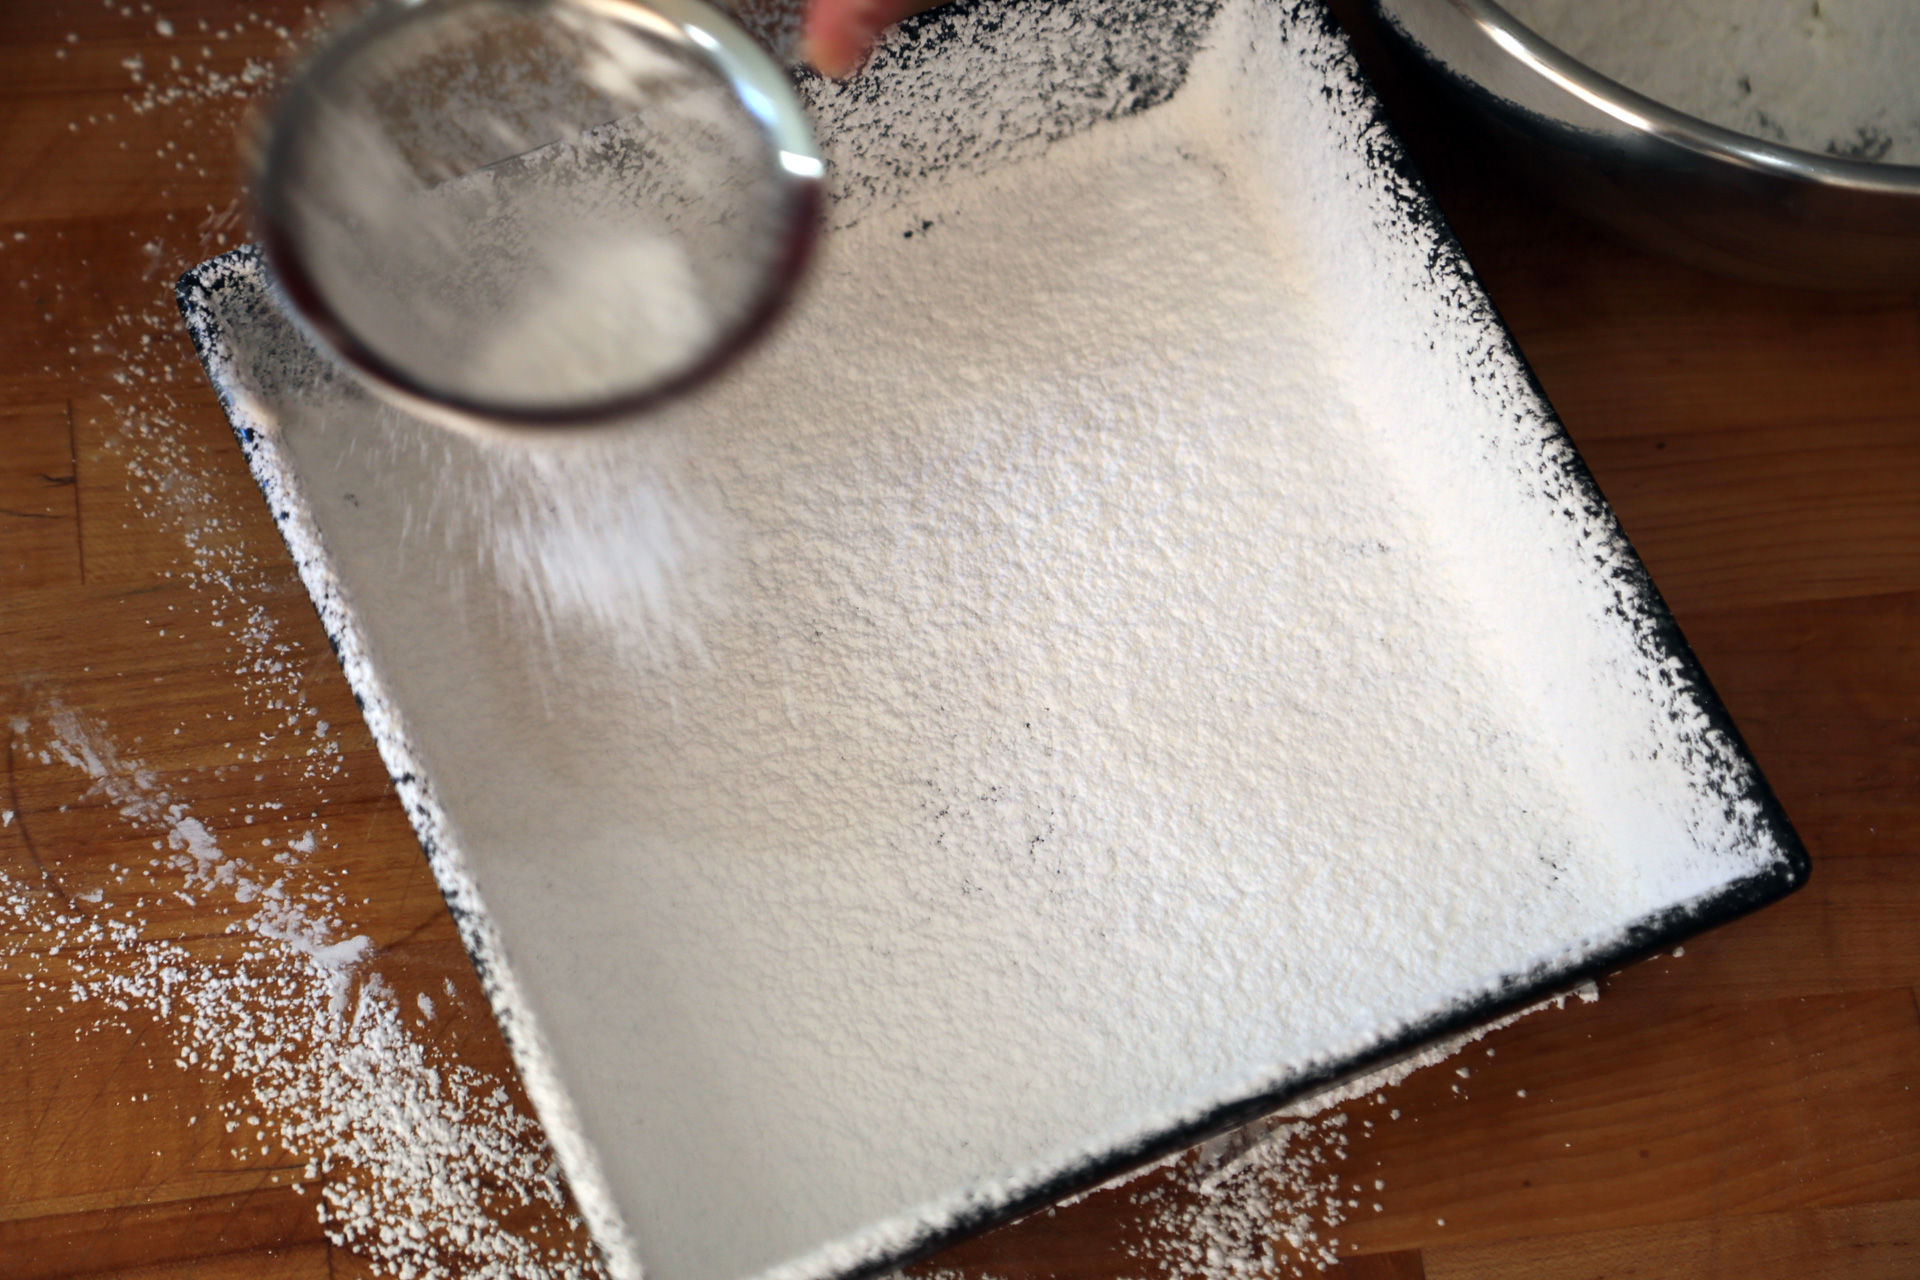 In a large bowl, sift together the powdered sugar and cornstarch. Using the sifter, dust the baking pan with about half of the mixture, making sure to cover the sides by tilting the pan to coat it evenly.